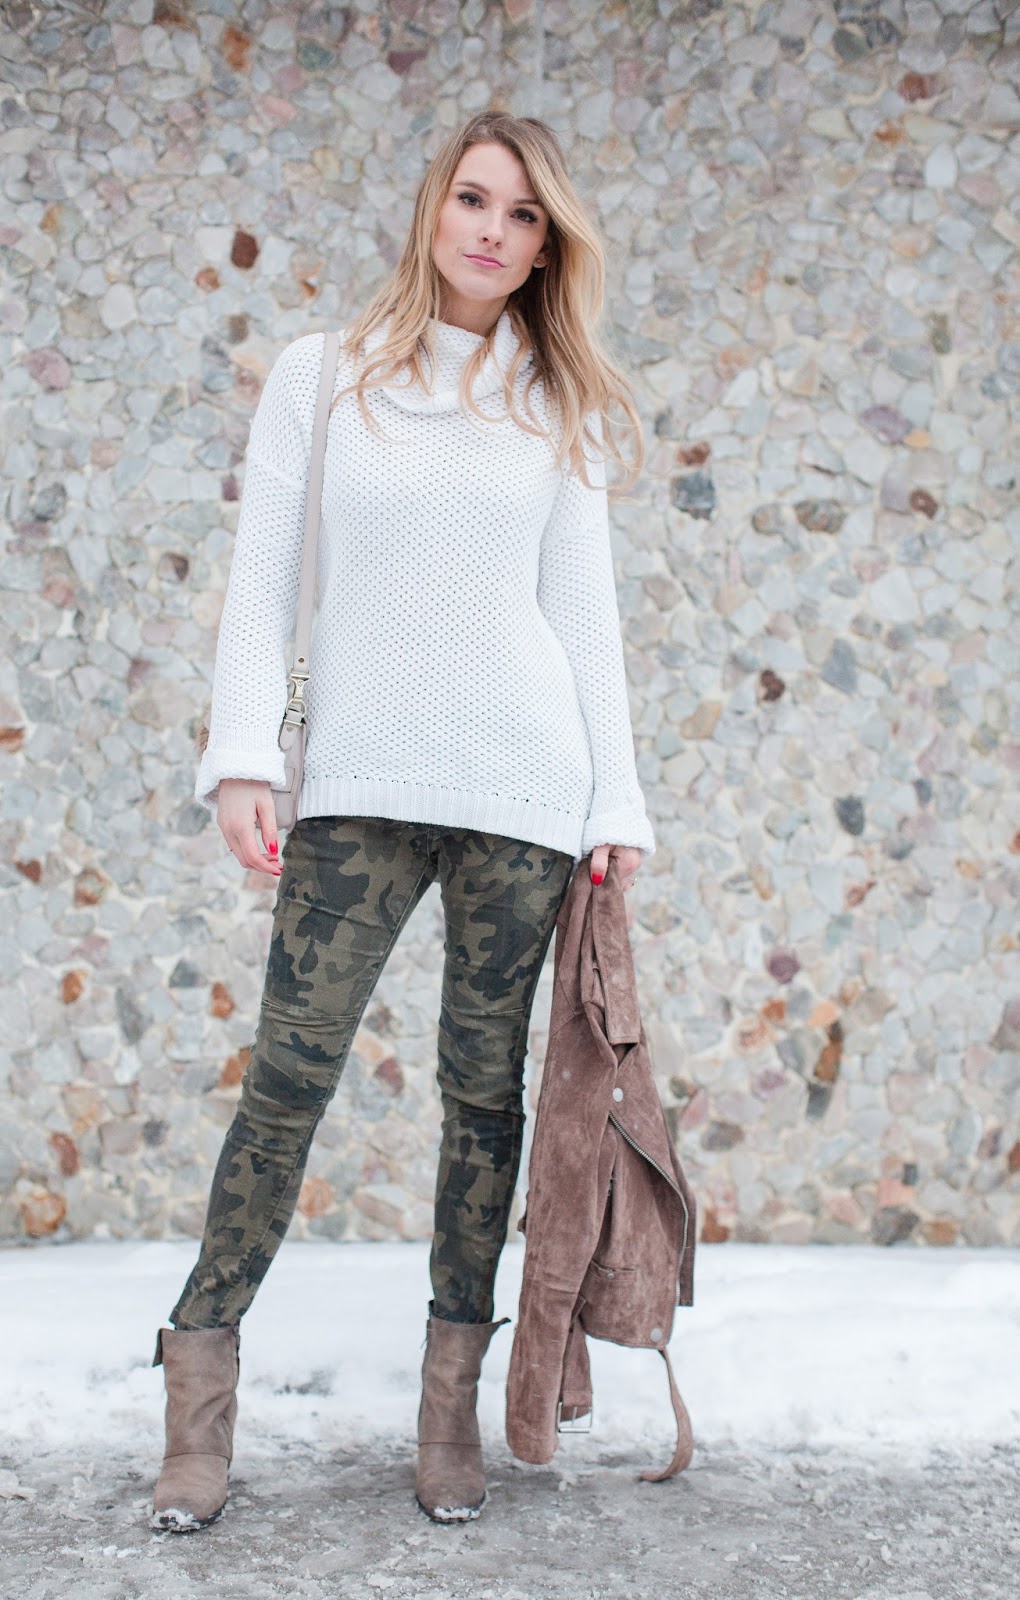 WHAT TO WEAR WITH CAMO PANTS - Life with A.Co by Amanda L. Conquer